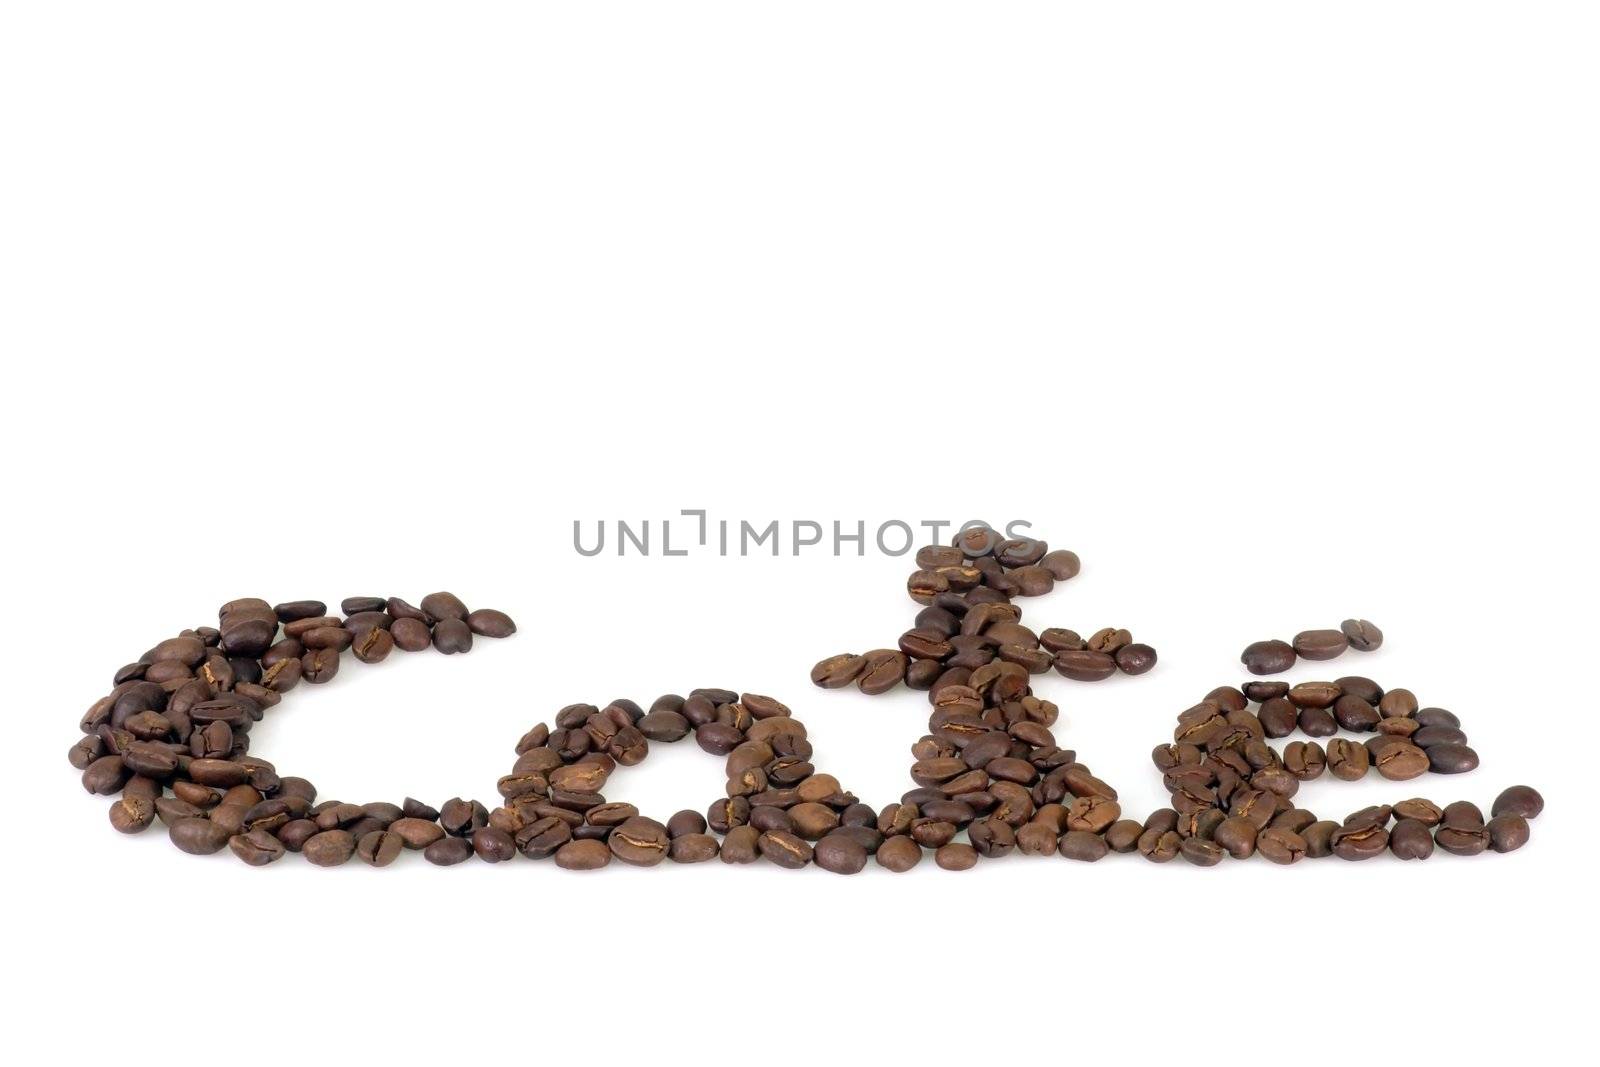 Coffee Beans by Teamarbeit